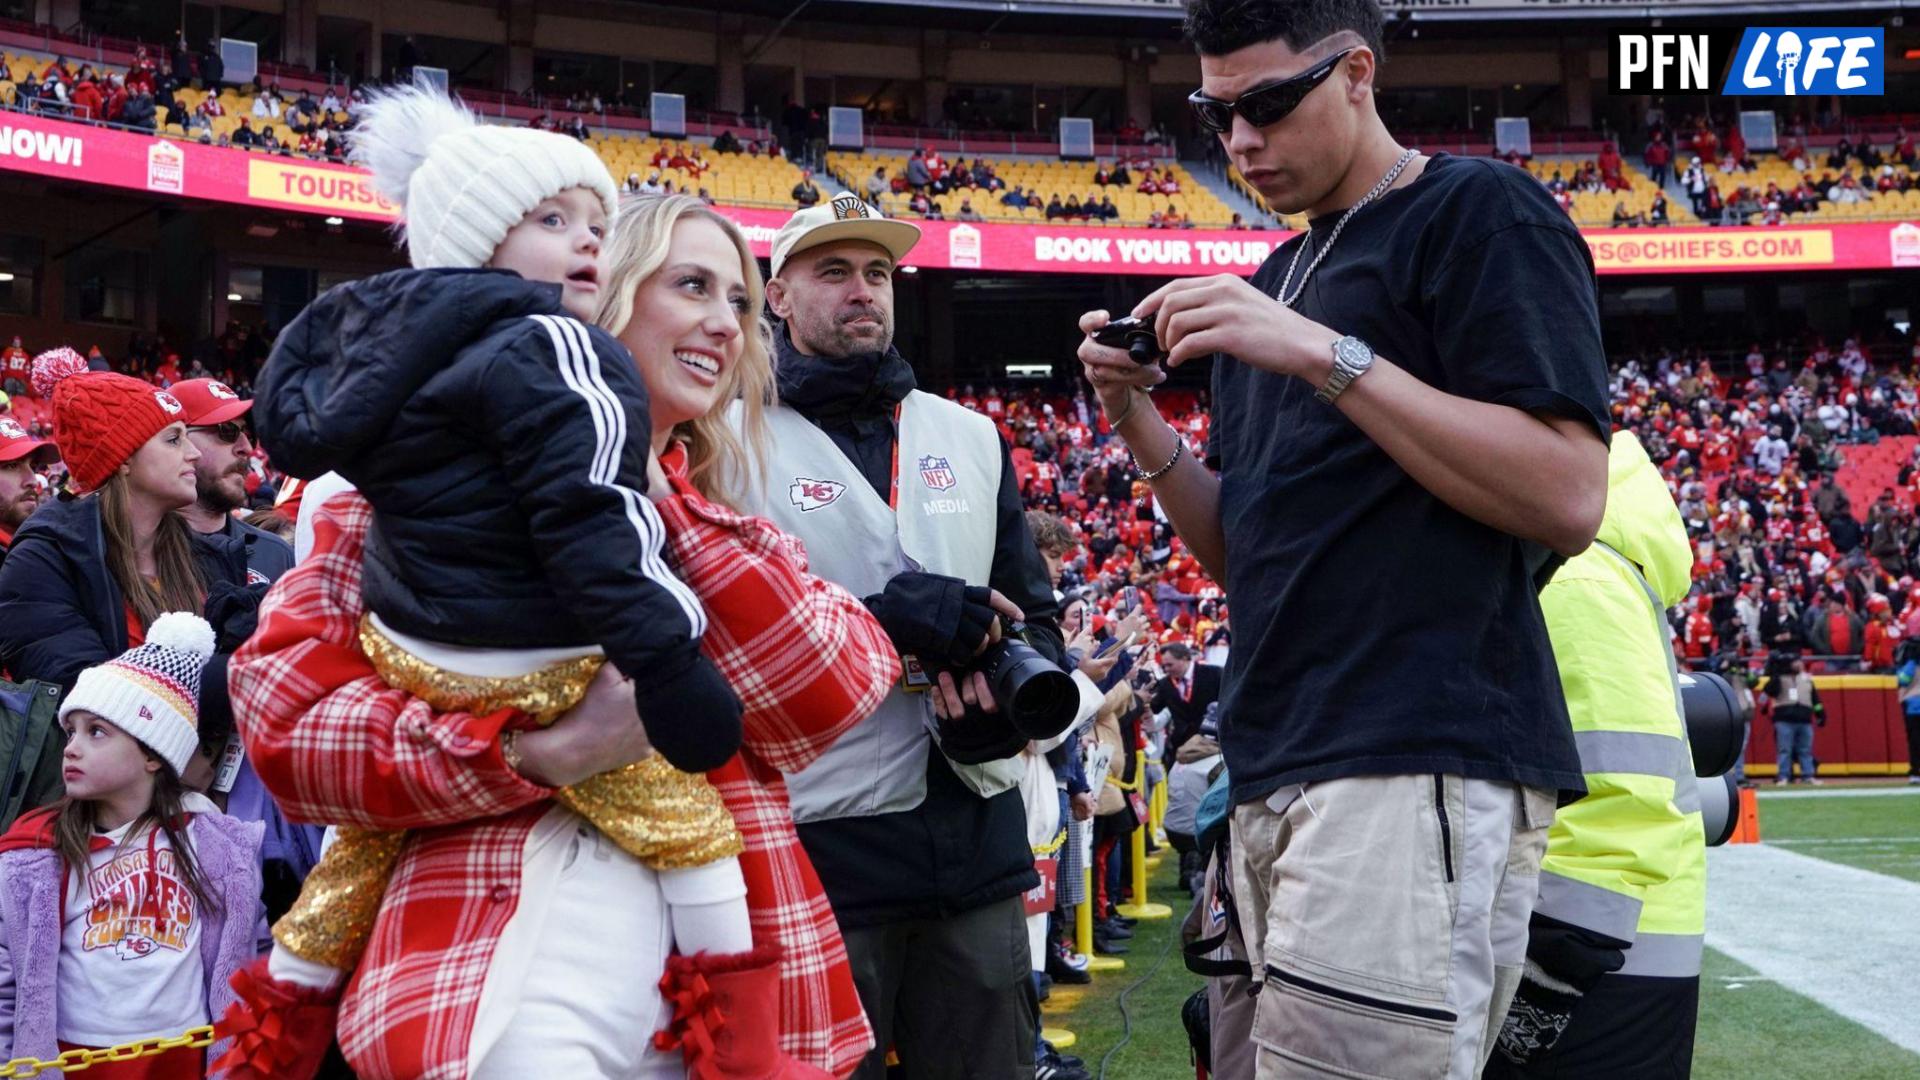 Patrick Mahomes' wife, Brittany, with their daughter, Sterling, and Patrick's brother, Jackson, on the sidelines prior to a game.